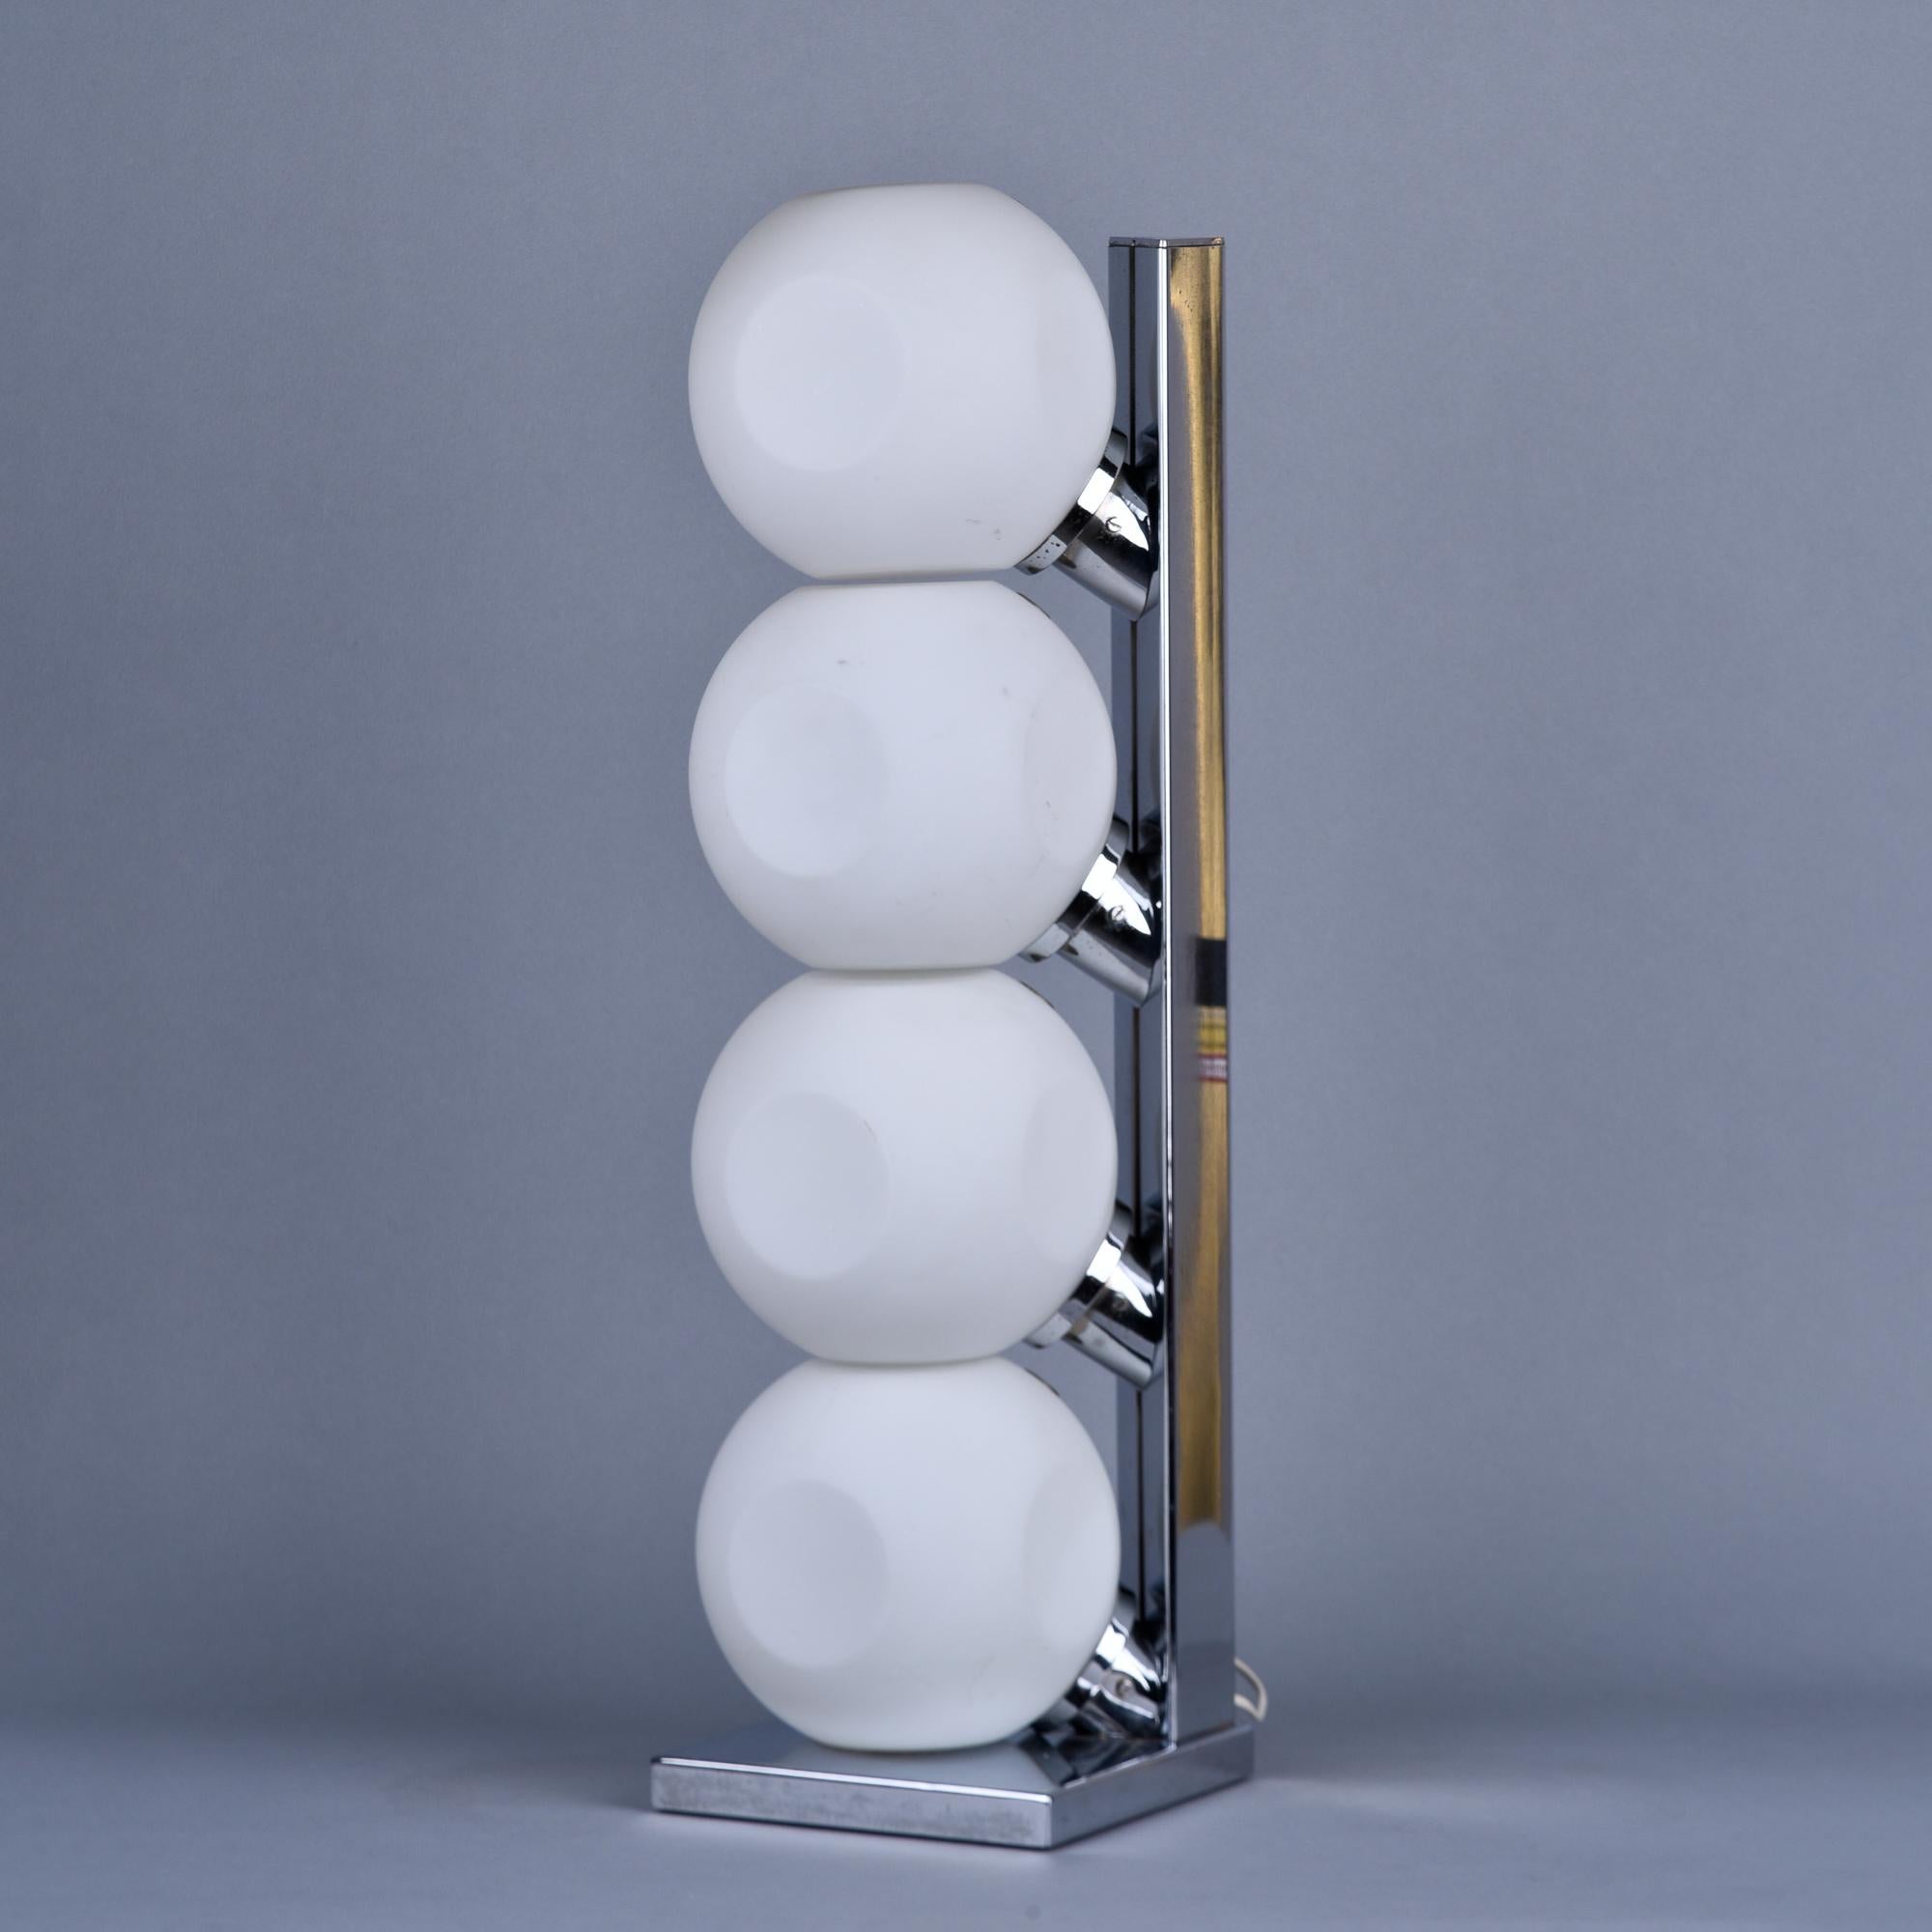 Found in Italy, this circa late 1960s / early 1970s table tamp features four white glass globes stacked at an angle on a polished metal base. Glass globes have disc shaped panels and each covers a candelabra sized socket. Unknown maker. 

Lamp has